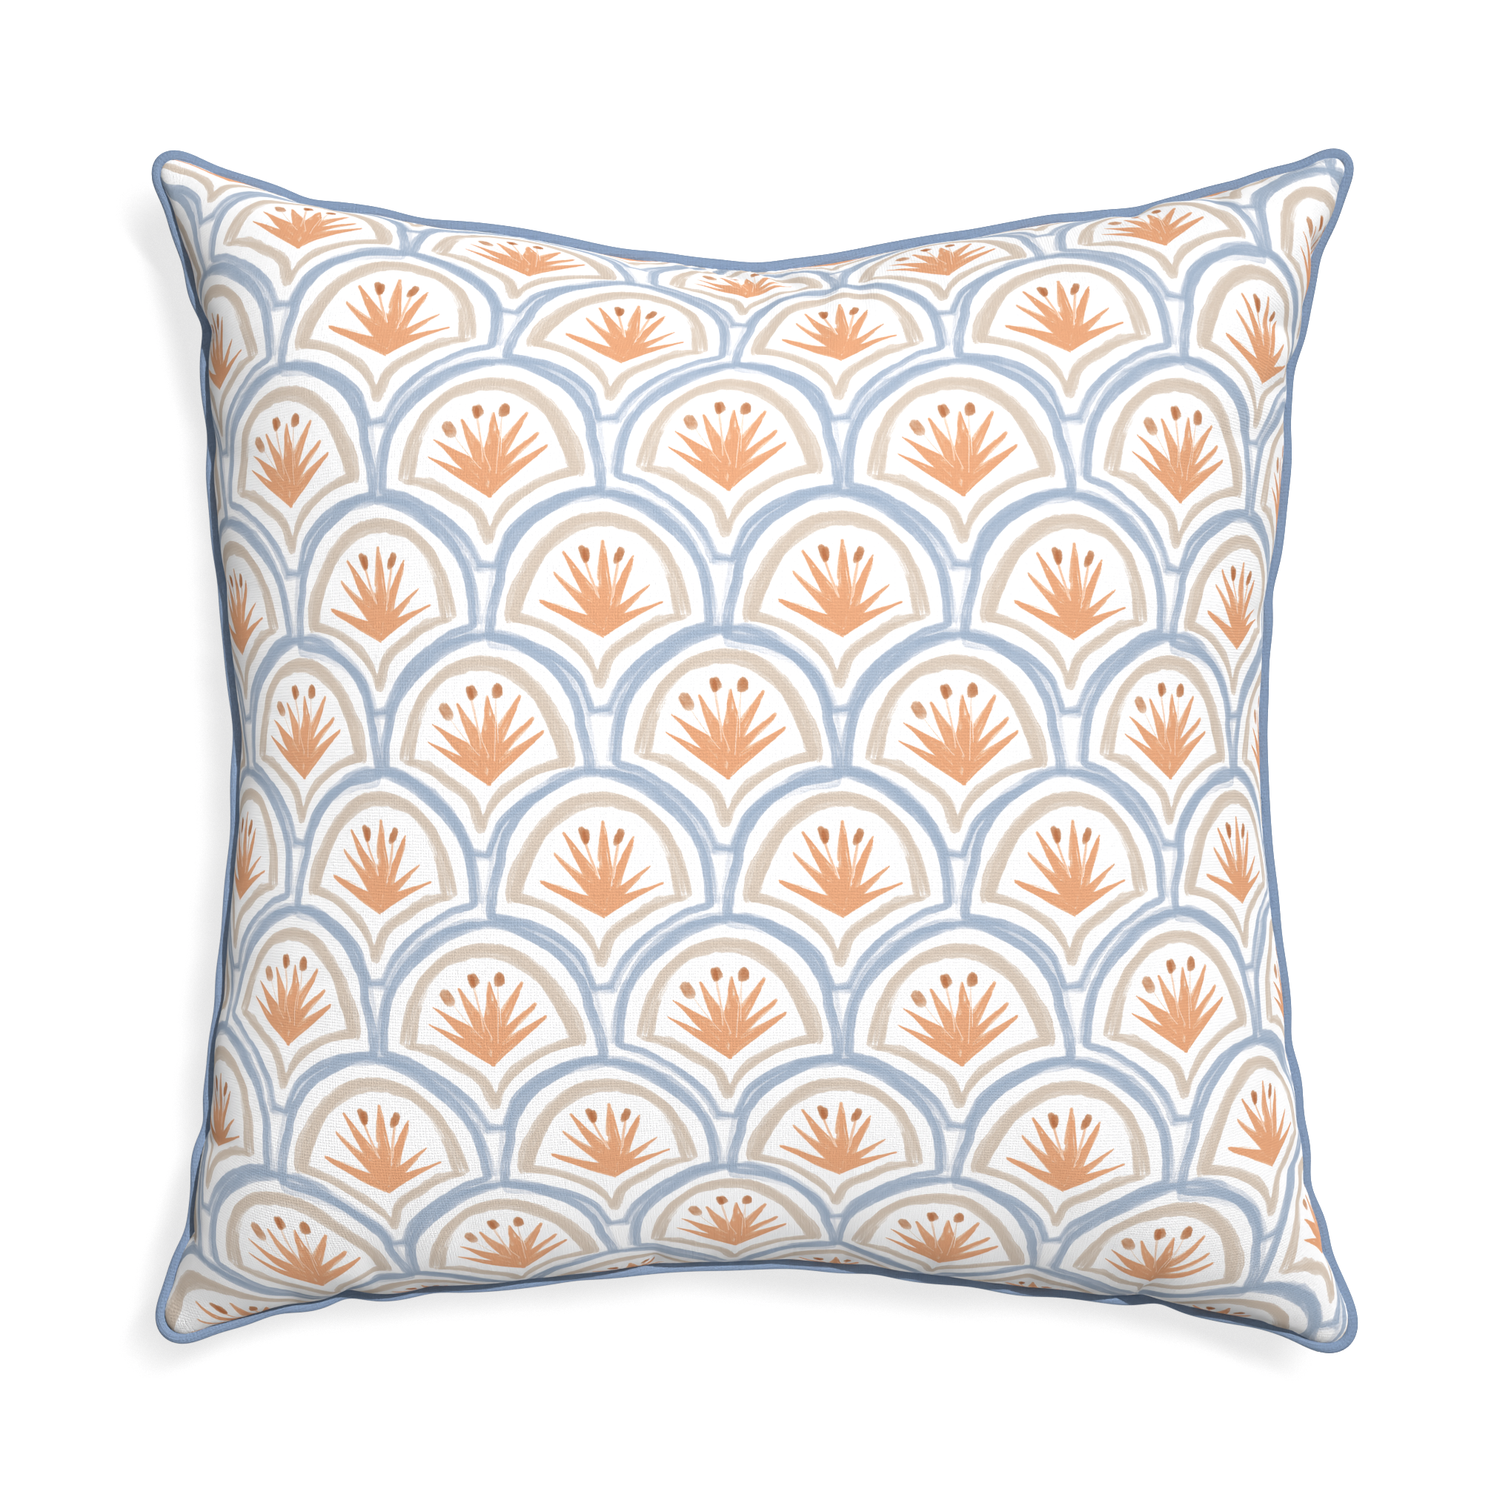 Euro-sham thatcher apricot custom pillow with sky piping on white background